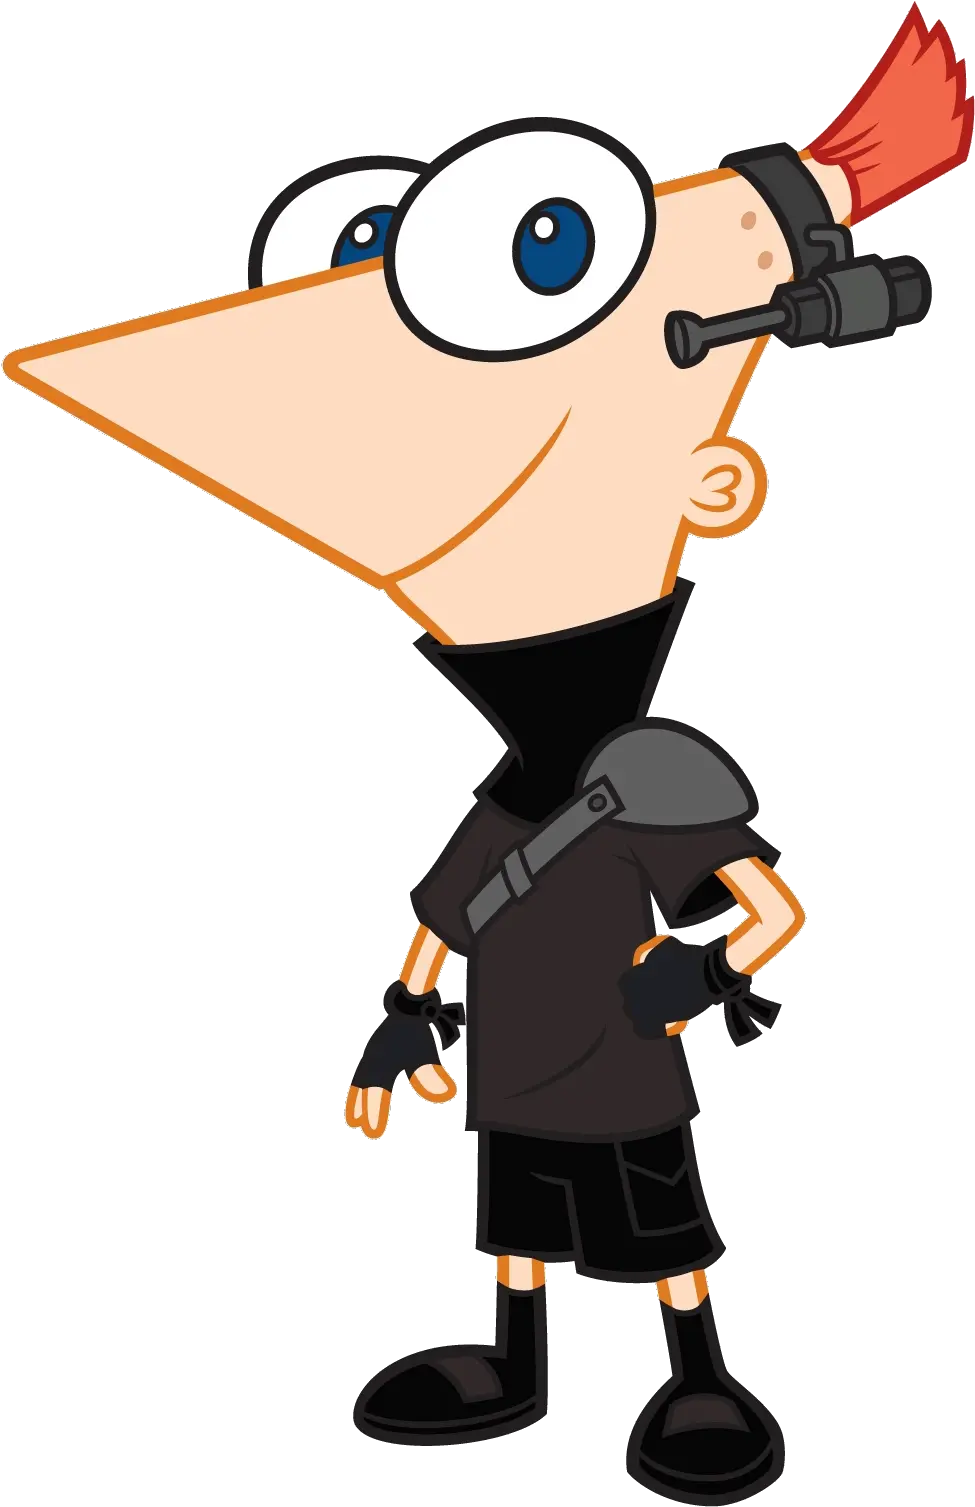 Phineas Flynn Phineas And Ferb The Movie Across The 2nd Dimension Phineas Png Phineas And Ferb Logo